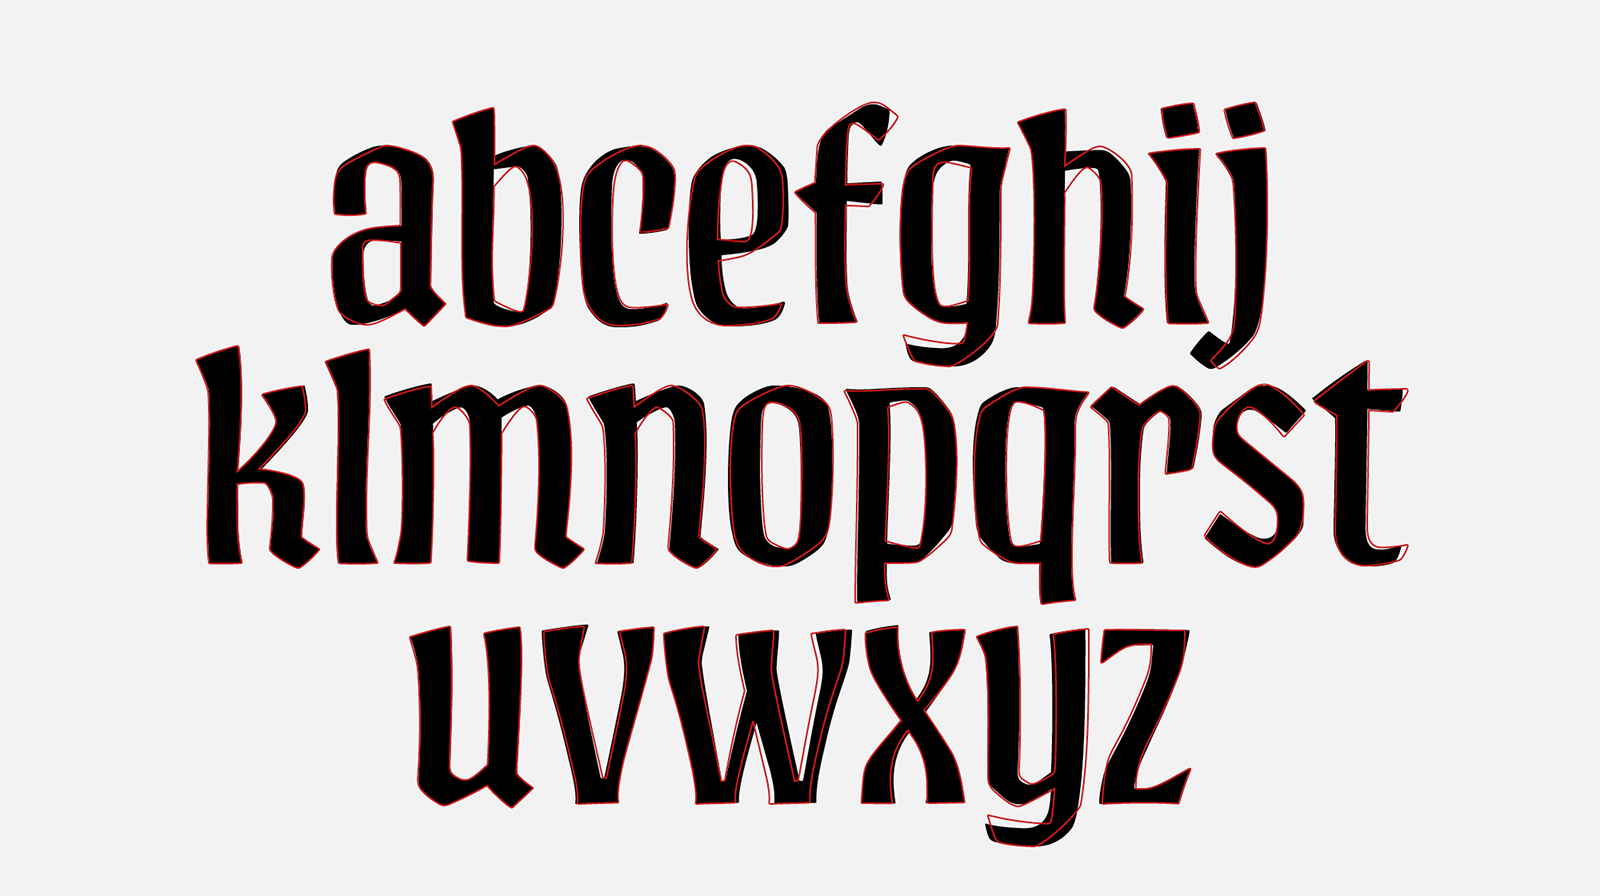 Our first design of the minuscule characters (black) compared to the outlines of the final font.